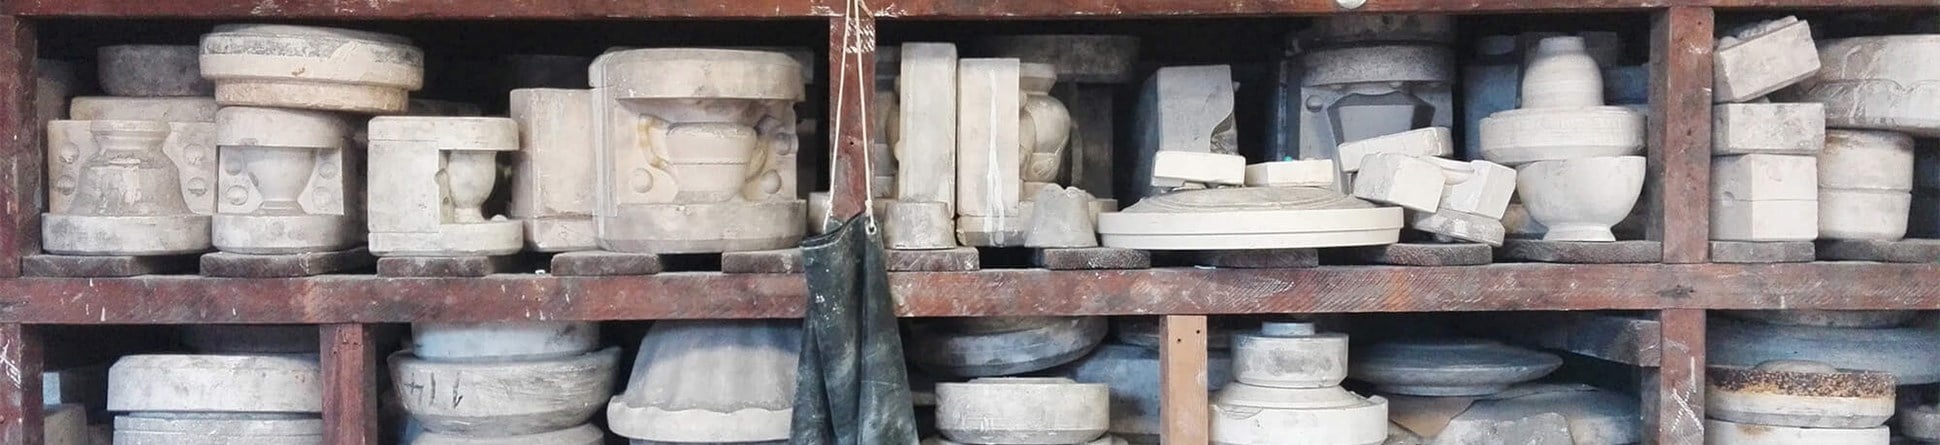 Photograph of shelves in a workshop stacked with plaster moulds for casting tableware ceramics. Varying sizes of moulds for teapots, bowls and cups are on display.